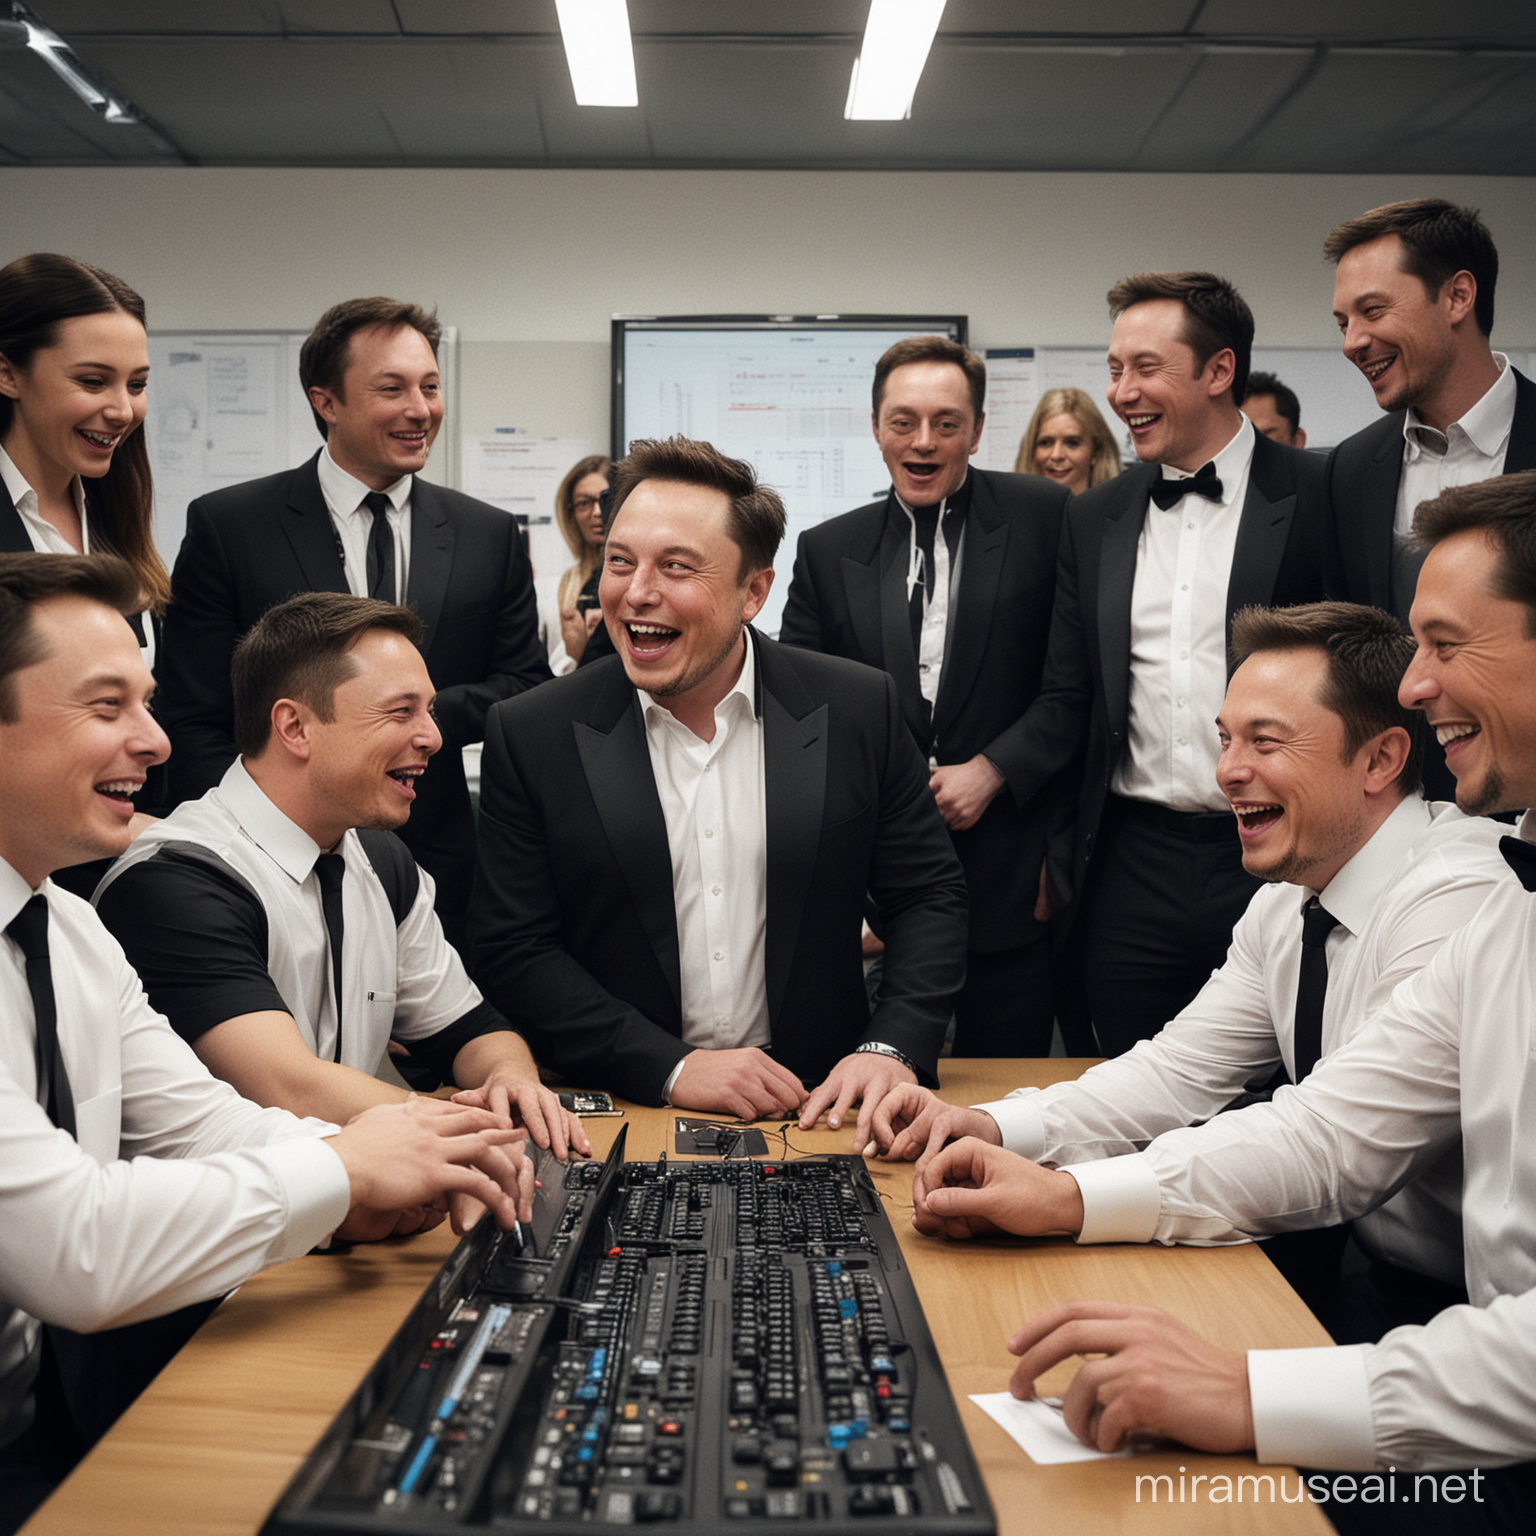 Elon Musk, dressed in a sleek black suit with a white tie, stands confidently amidst his team, who are gathered around computers displaying complex data. Musk's face adorns each team member, creating a surreal but captivating effect. As Musk extends his hand towards the screen with a grin, his team members wear expressions of shock and confusion. However, Musk himself bursts into laughter, amused by the simplicity of the solution. With a snap of his fingers, the problem is resolved, and the tension dissipates as the team joins in Musk's laughter. This image captures Musk's leadership, intelligence, and ability to inspire his team even in challenging situations.
